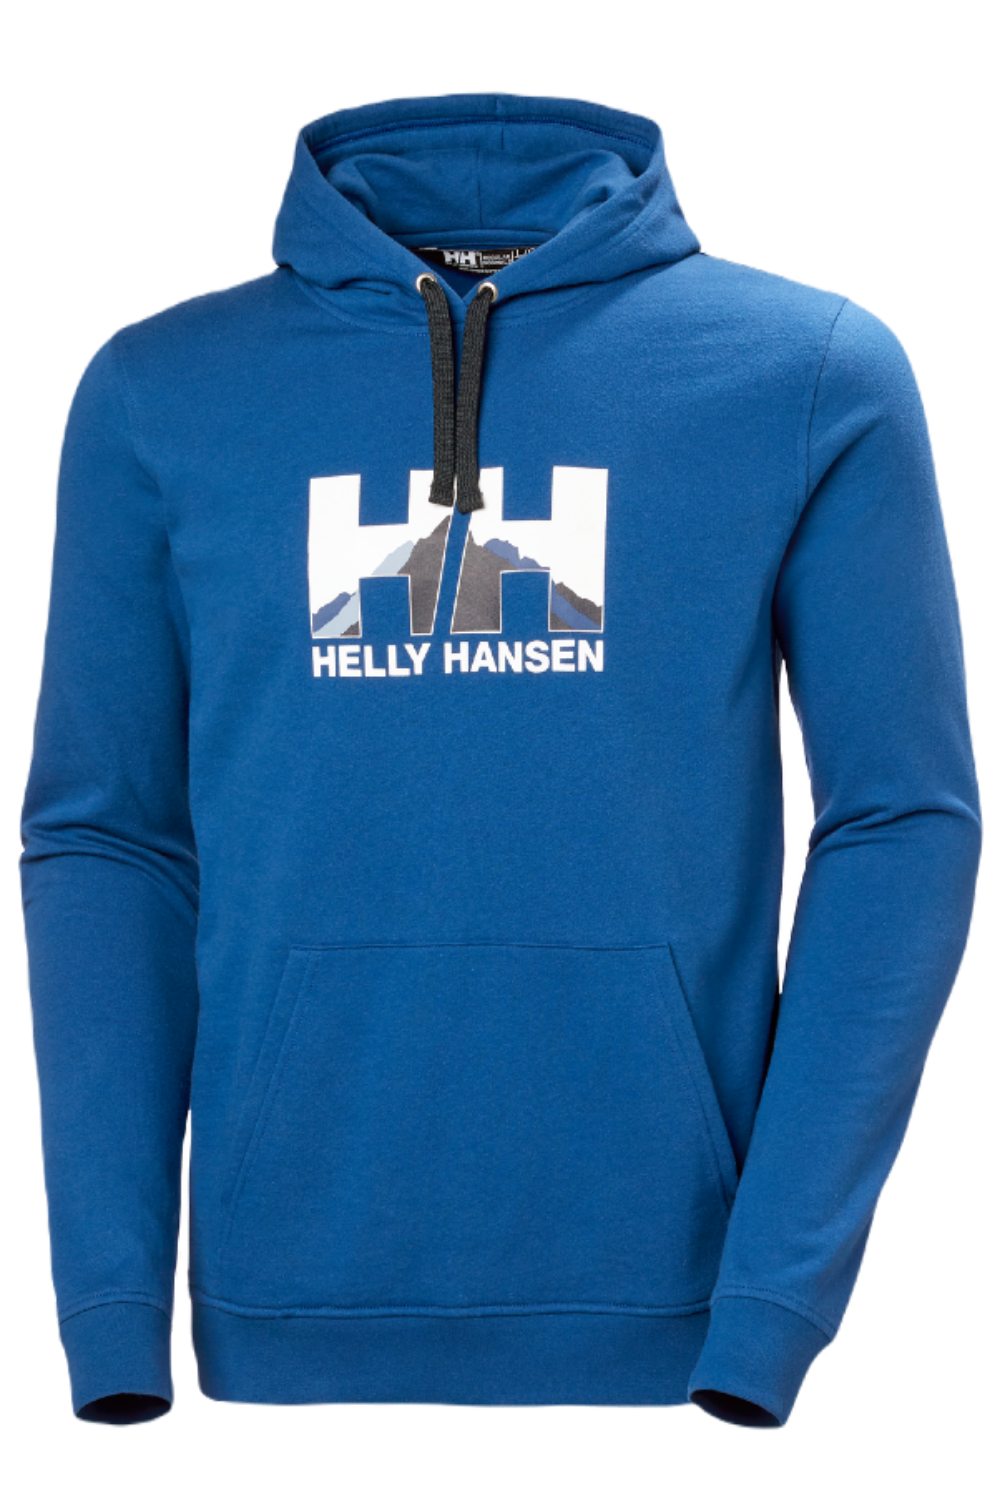 Helly Hansen Nord Graphic Pullover Hoodie in Deep Fjord